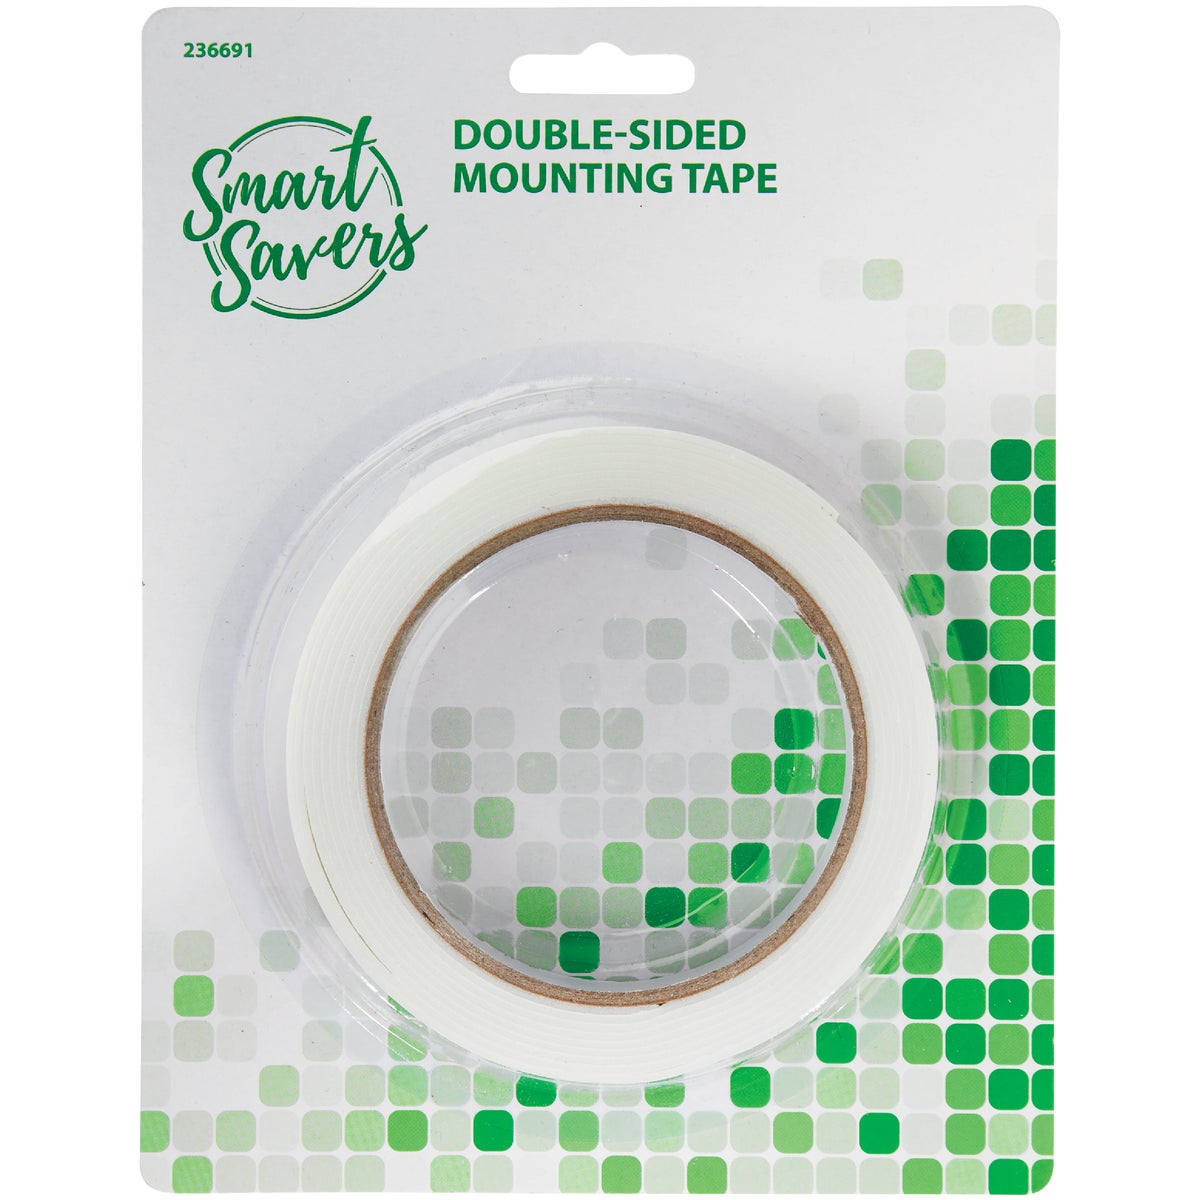 Item 236691, Smart Savers double-sided foam mounting tape.